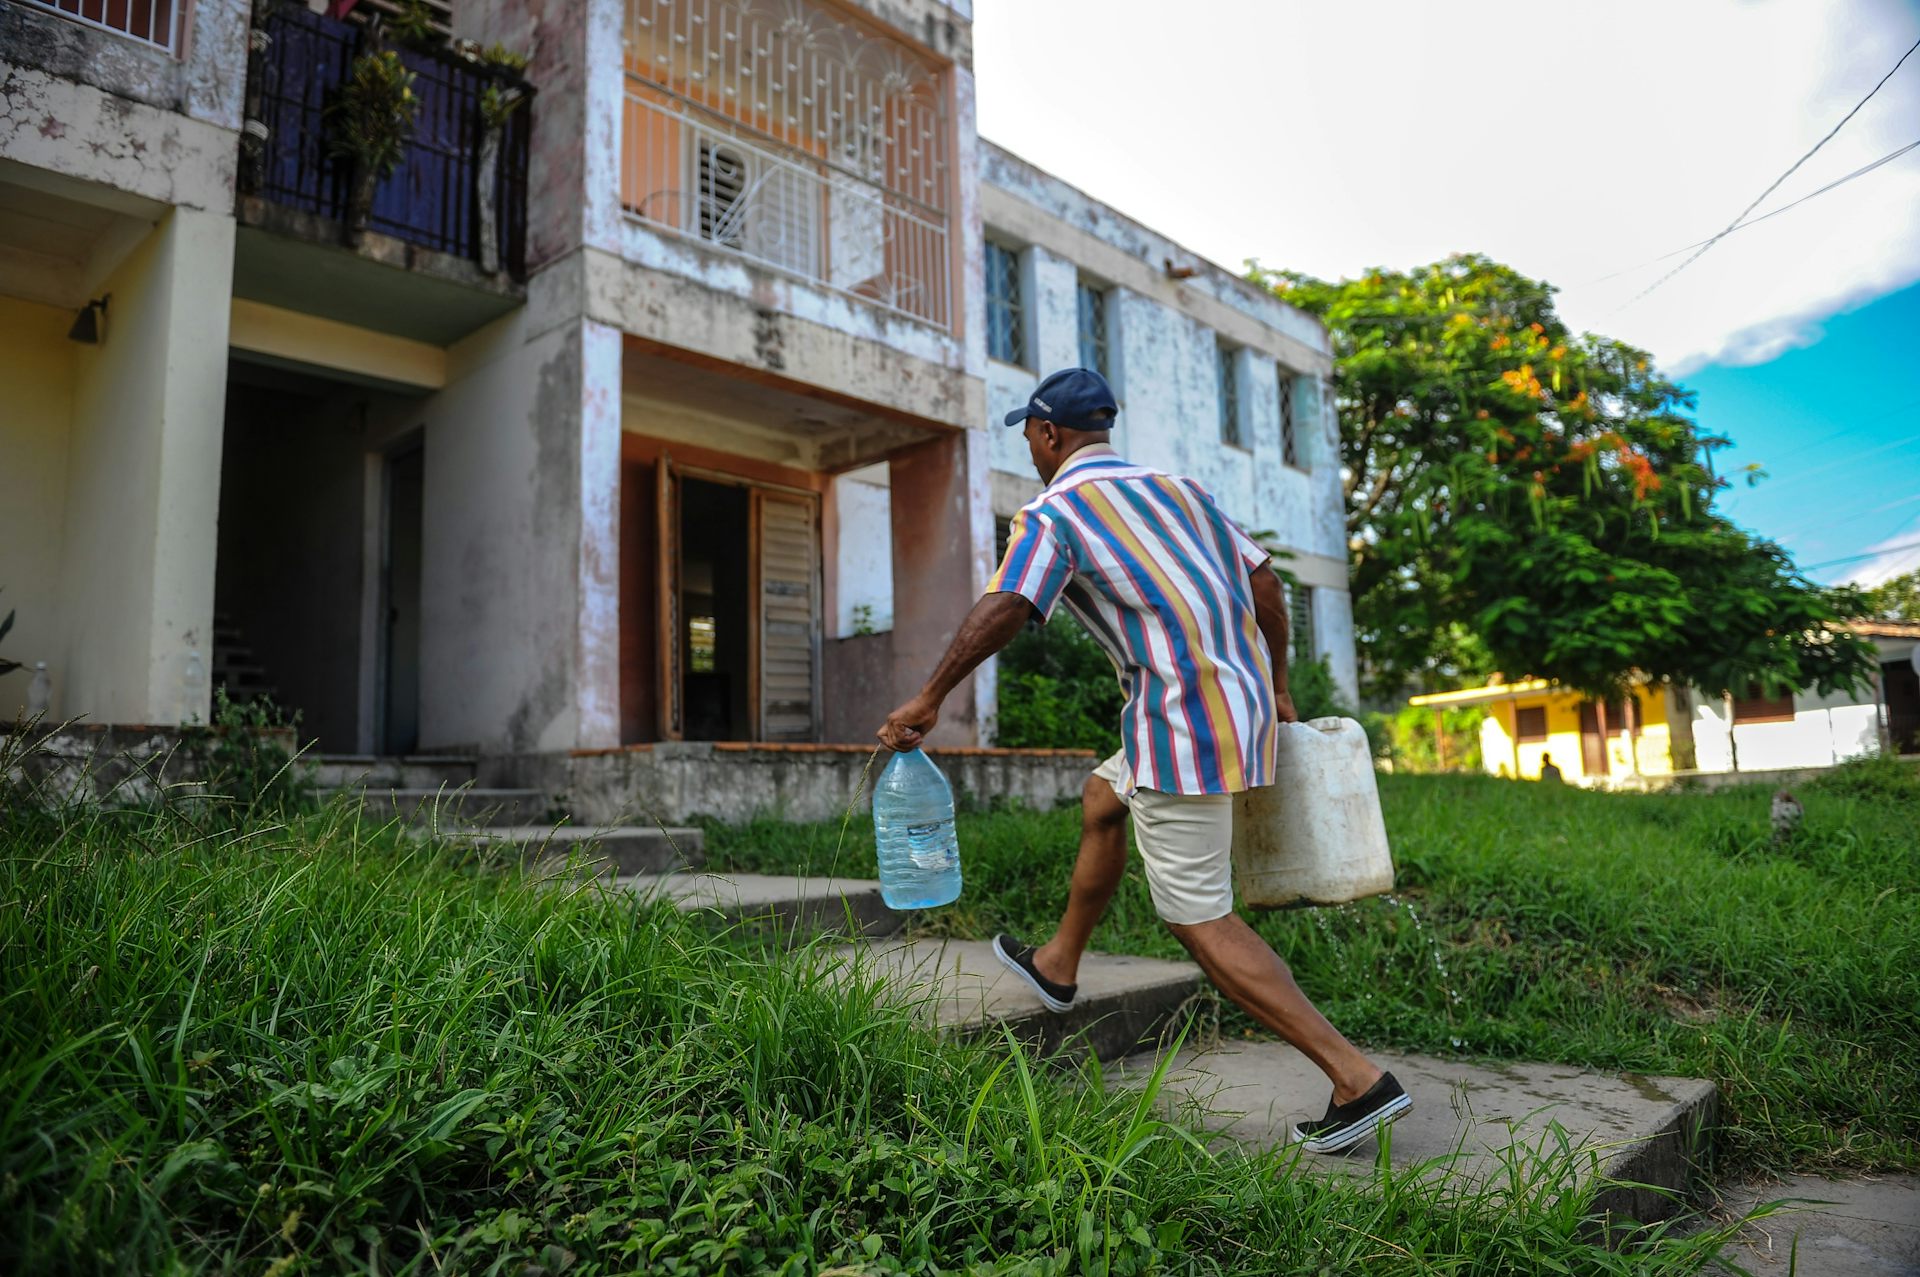 Thirsty in paradise: Water crises are a growing problem across the Caribbean islands